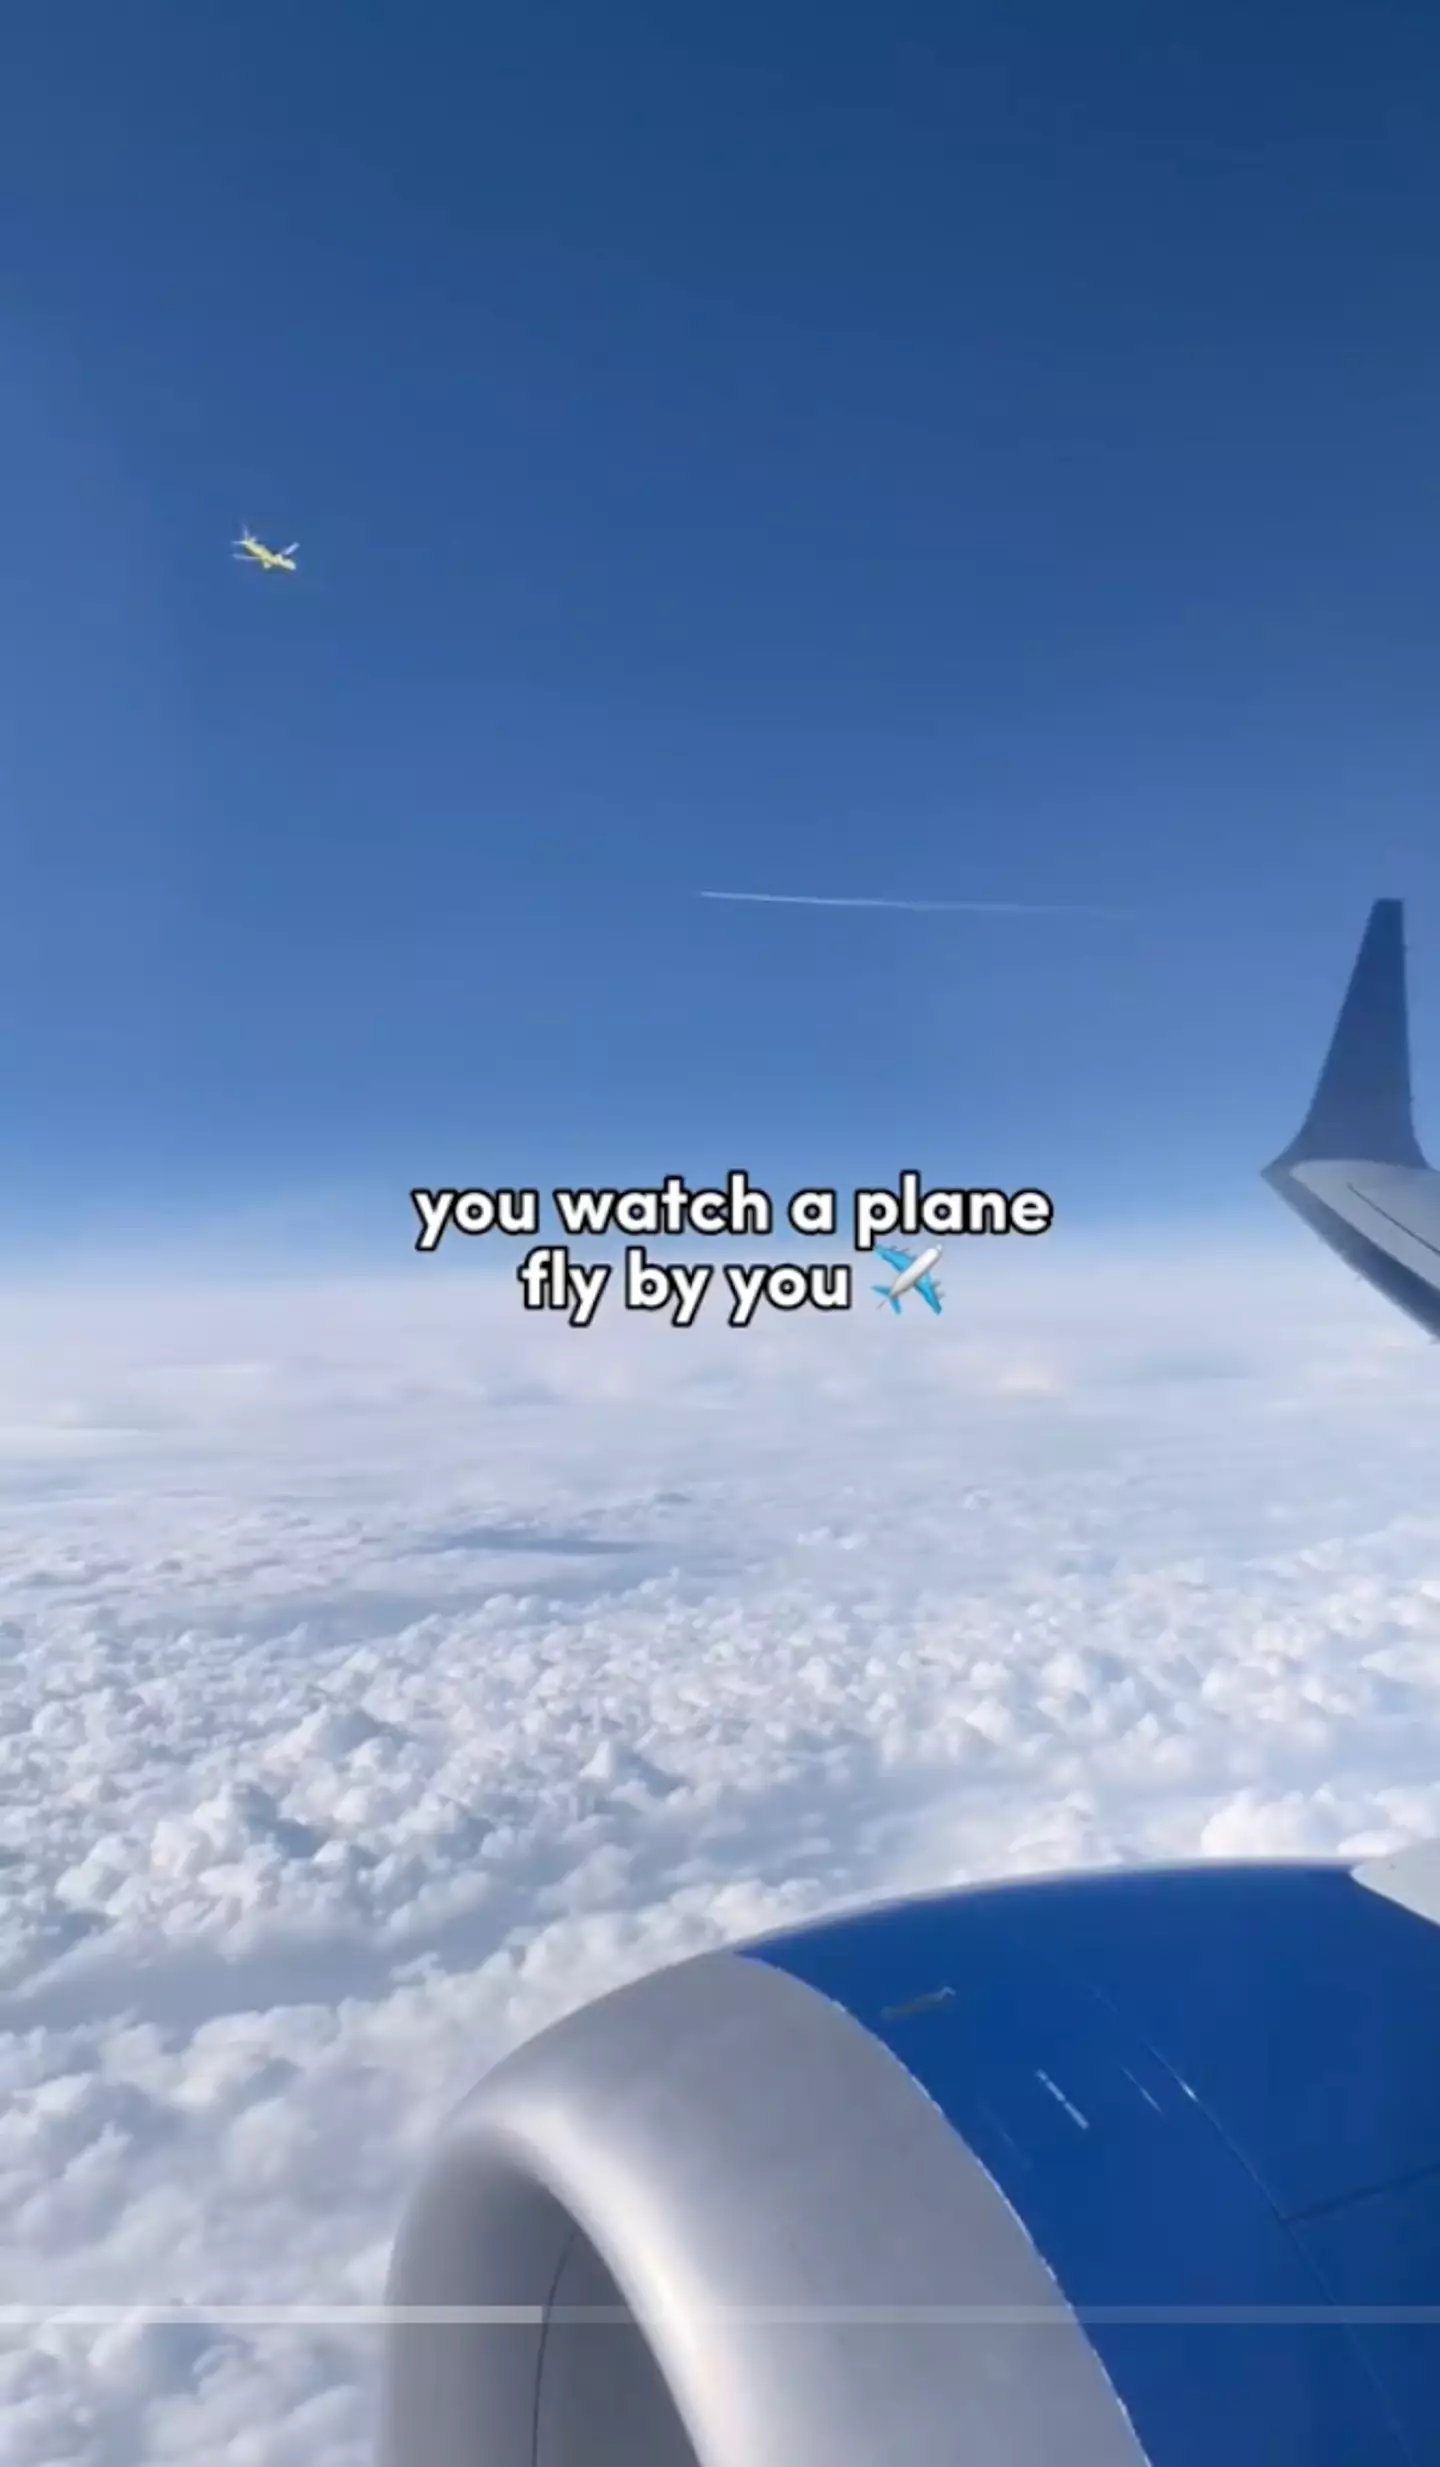 In the video another plane whizzes past through the window.